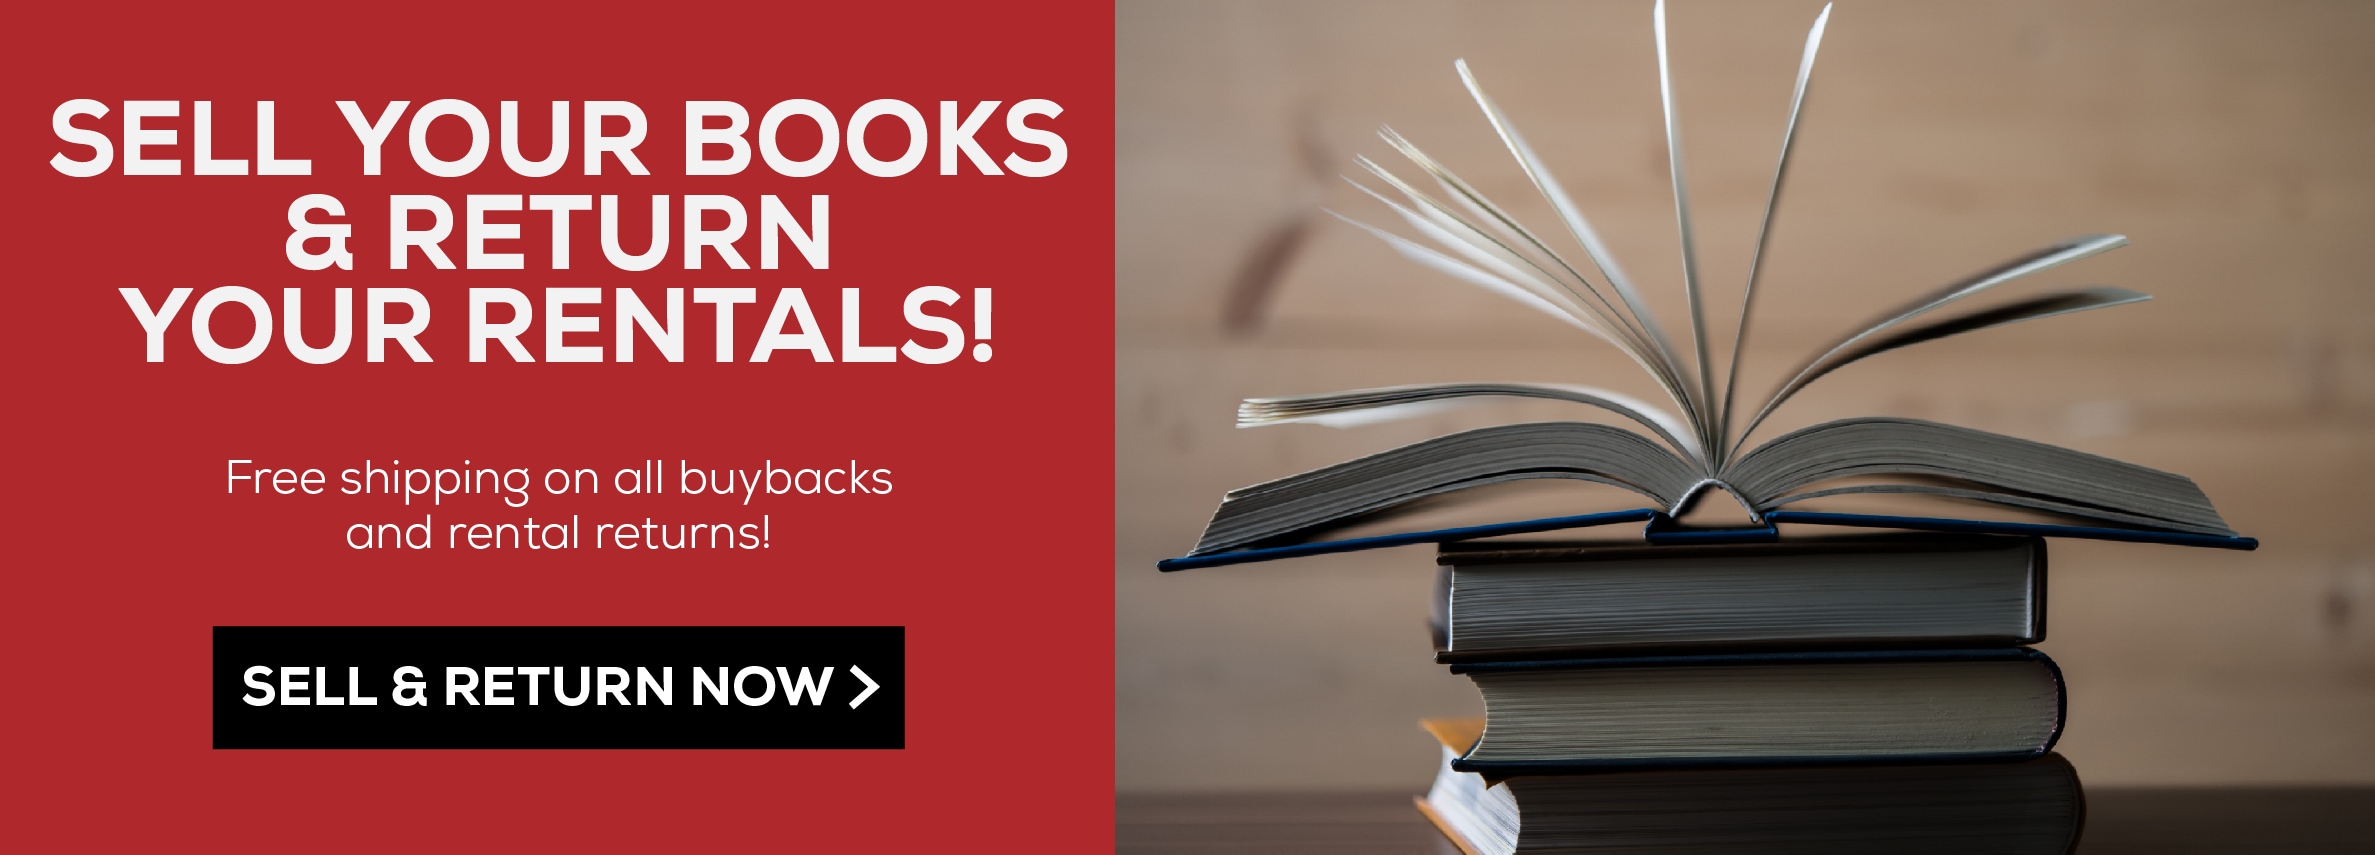 Sell books and return rentals online! Free shipping on all buybacks and rental returns! Sell & Return Now.